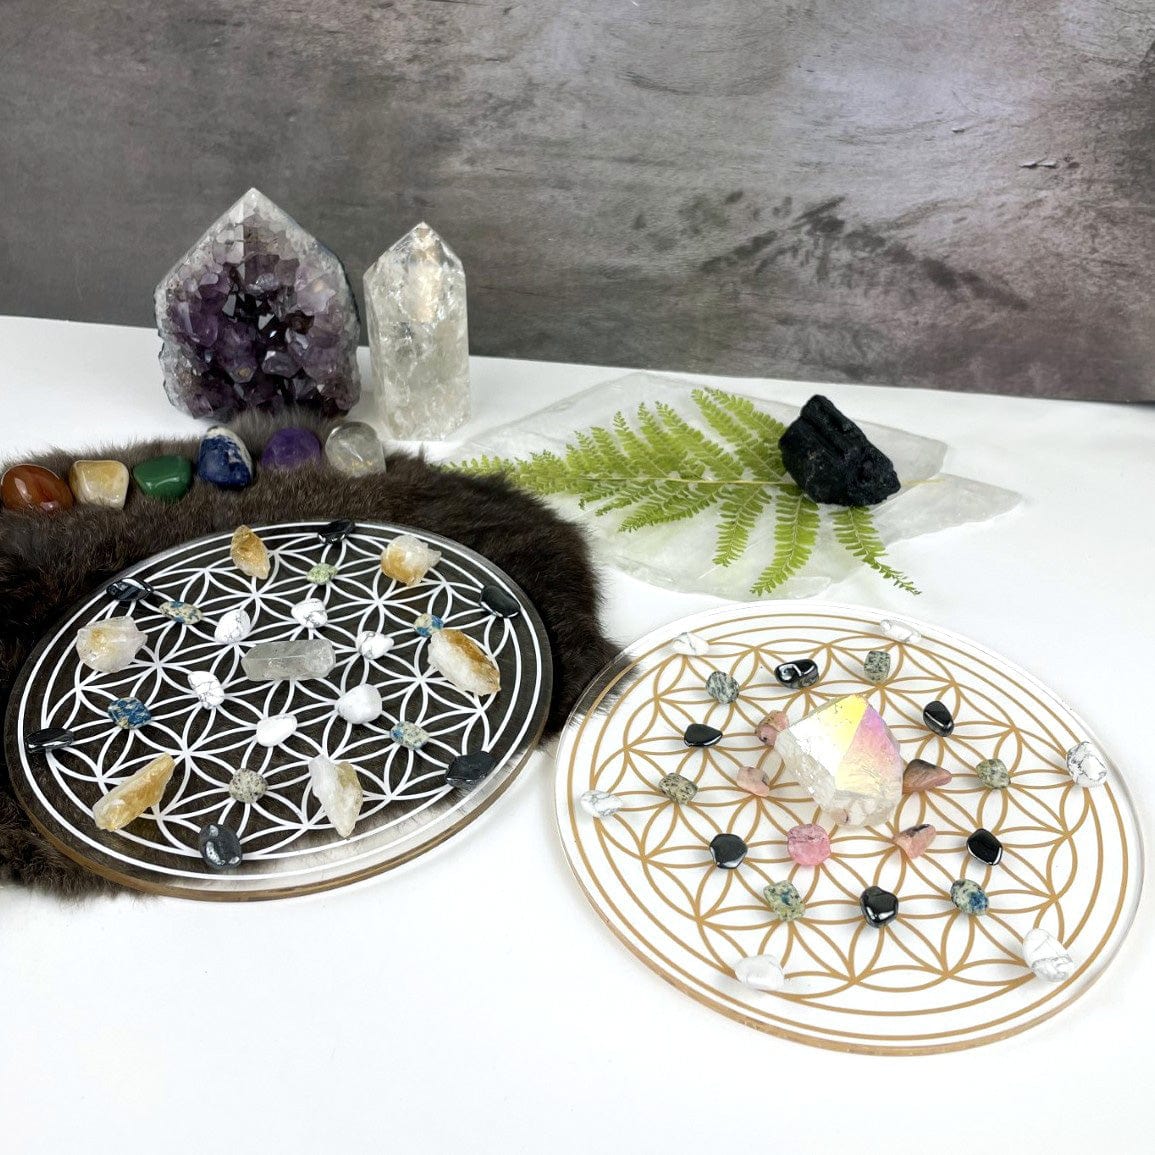 Crystal Grid Flower of Life Acrylic Grid - 2 sided - White and Gold showing each side